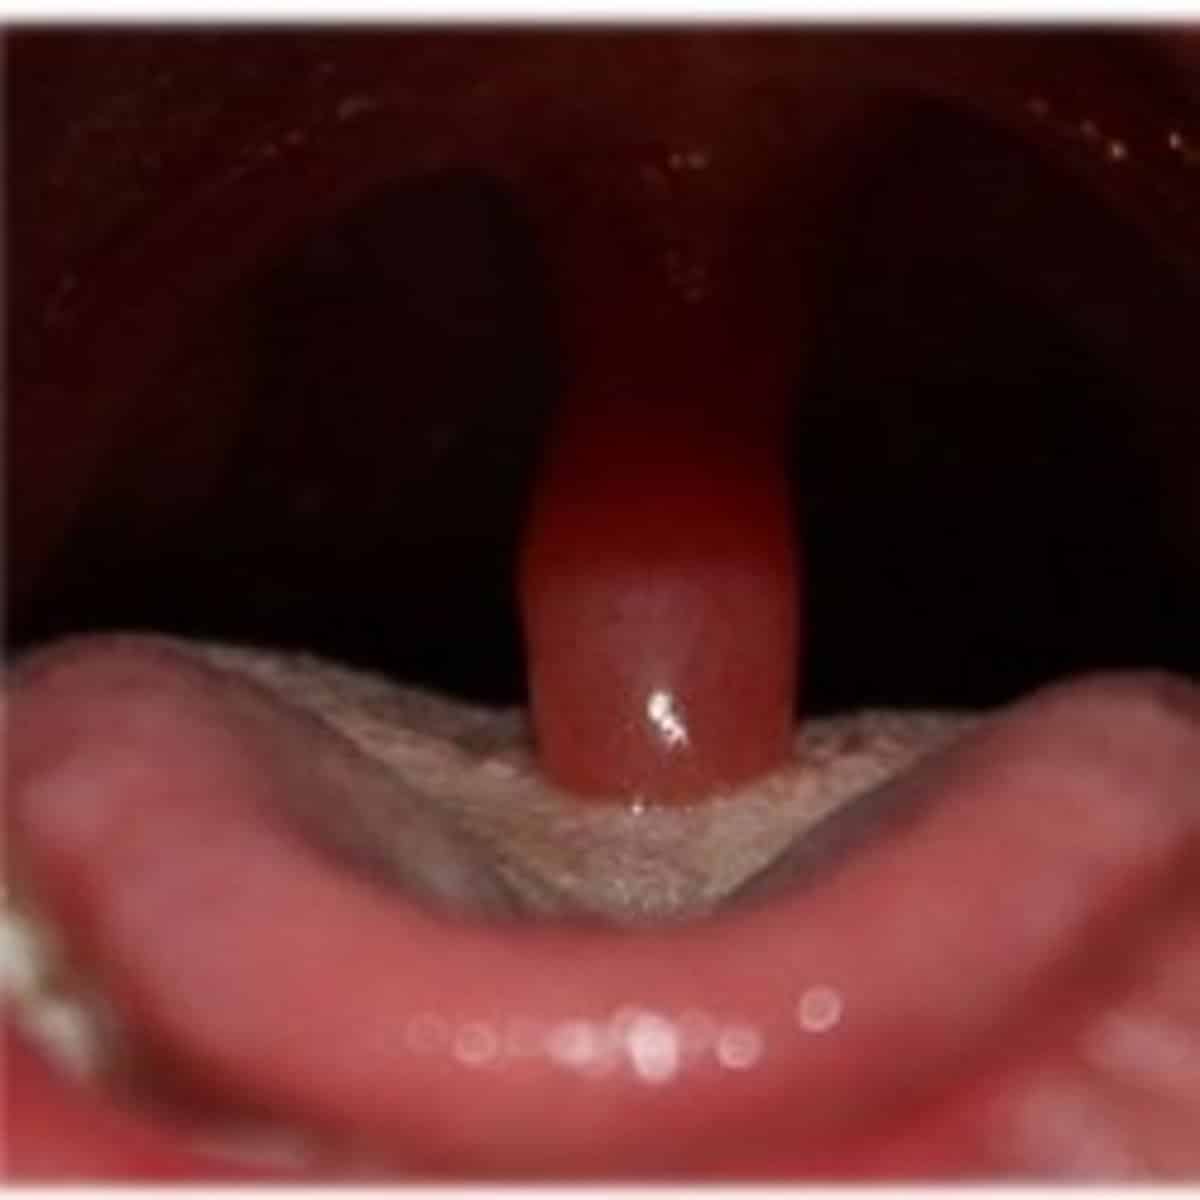 My Experience With Uvulitis (Not Fun)